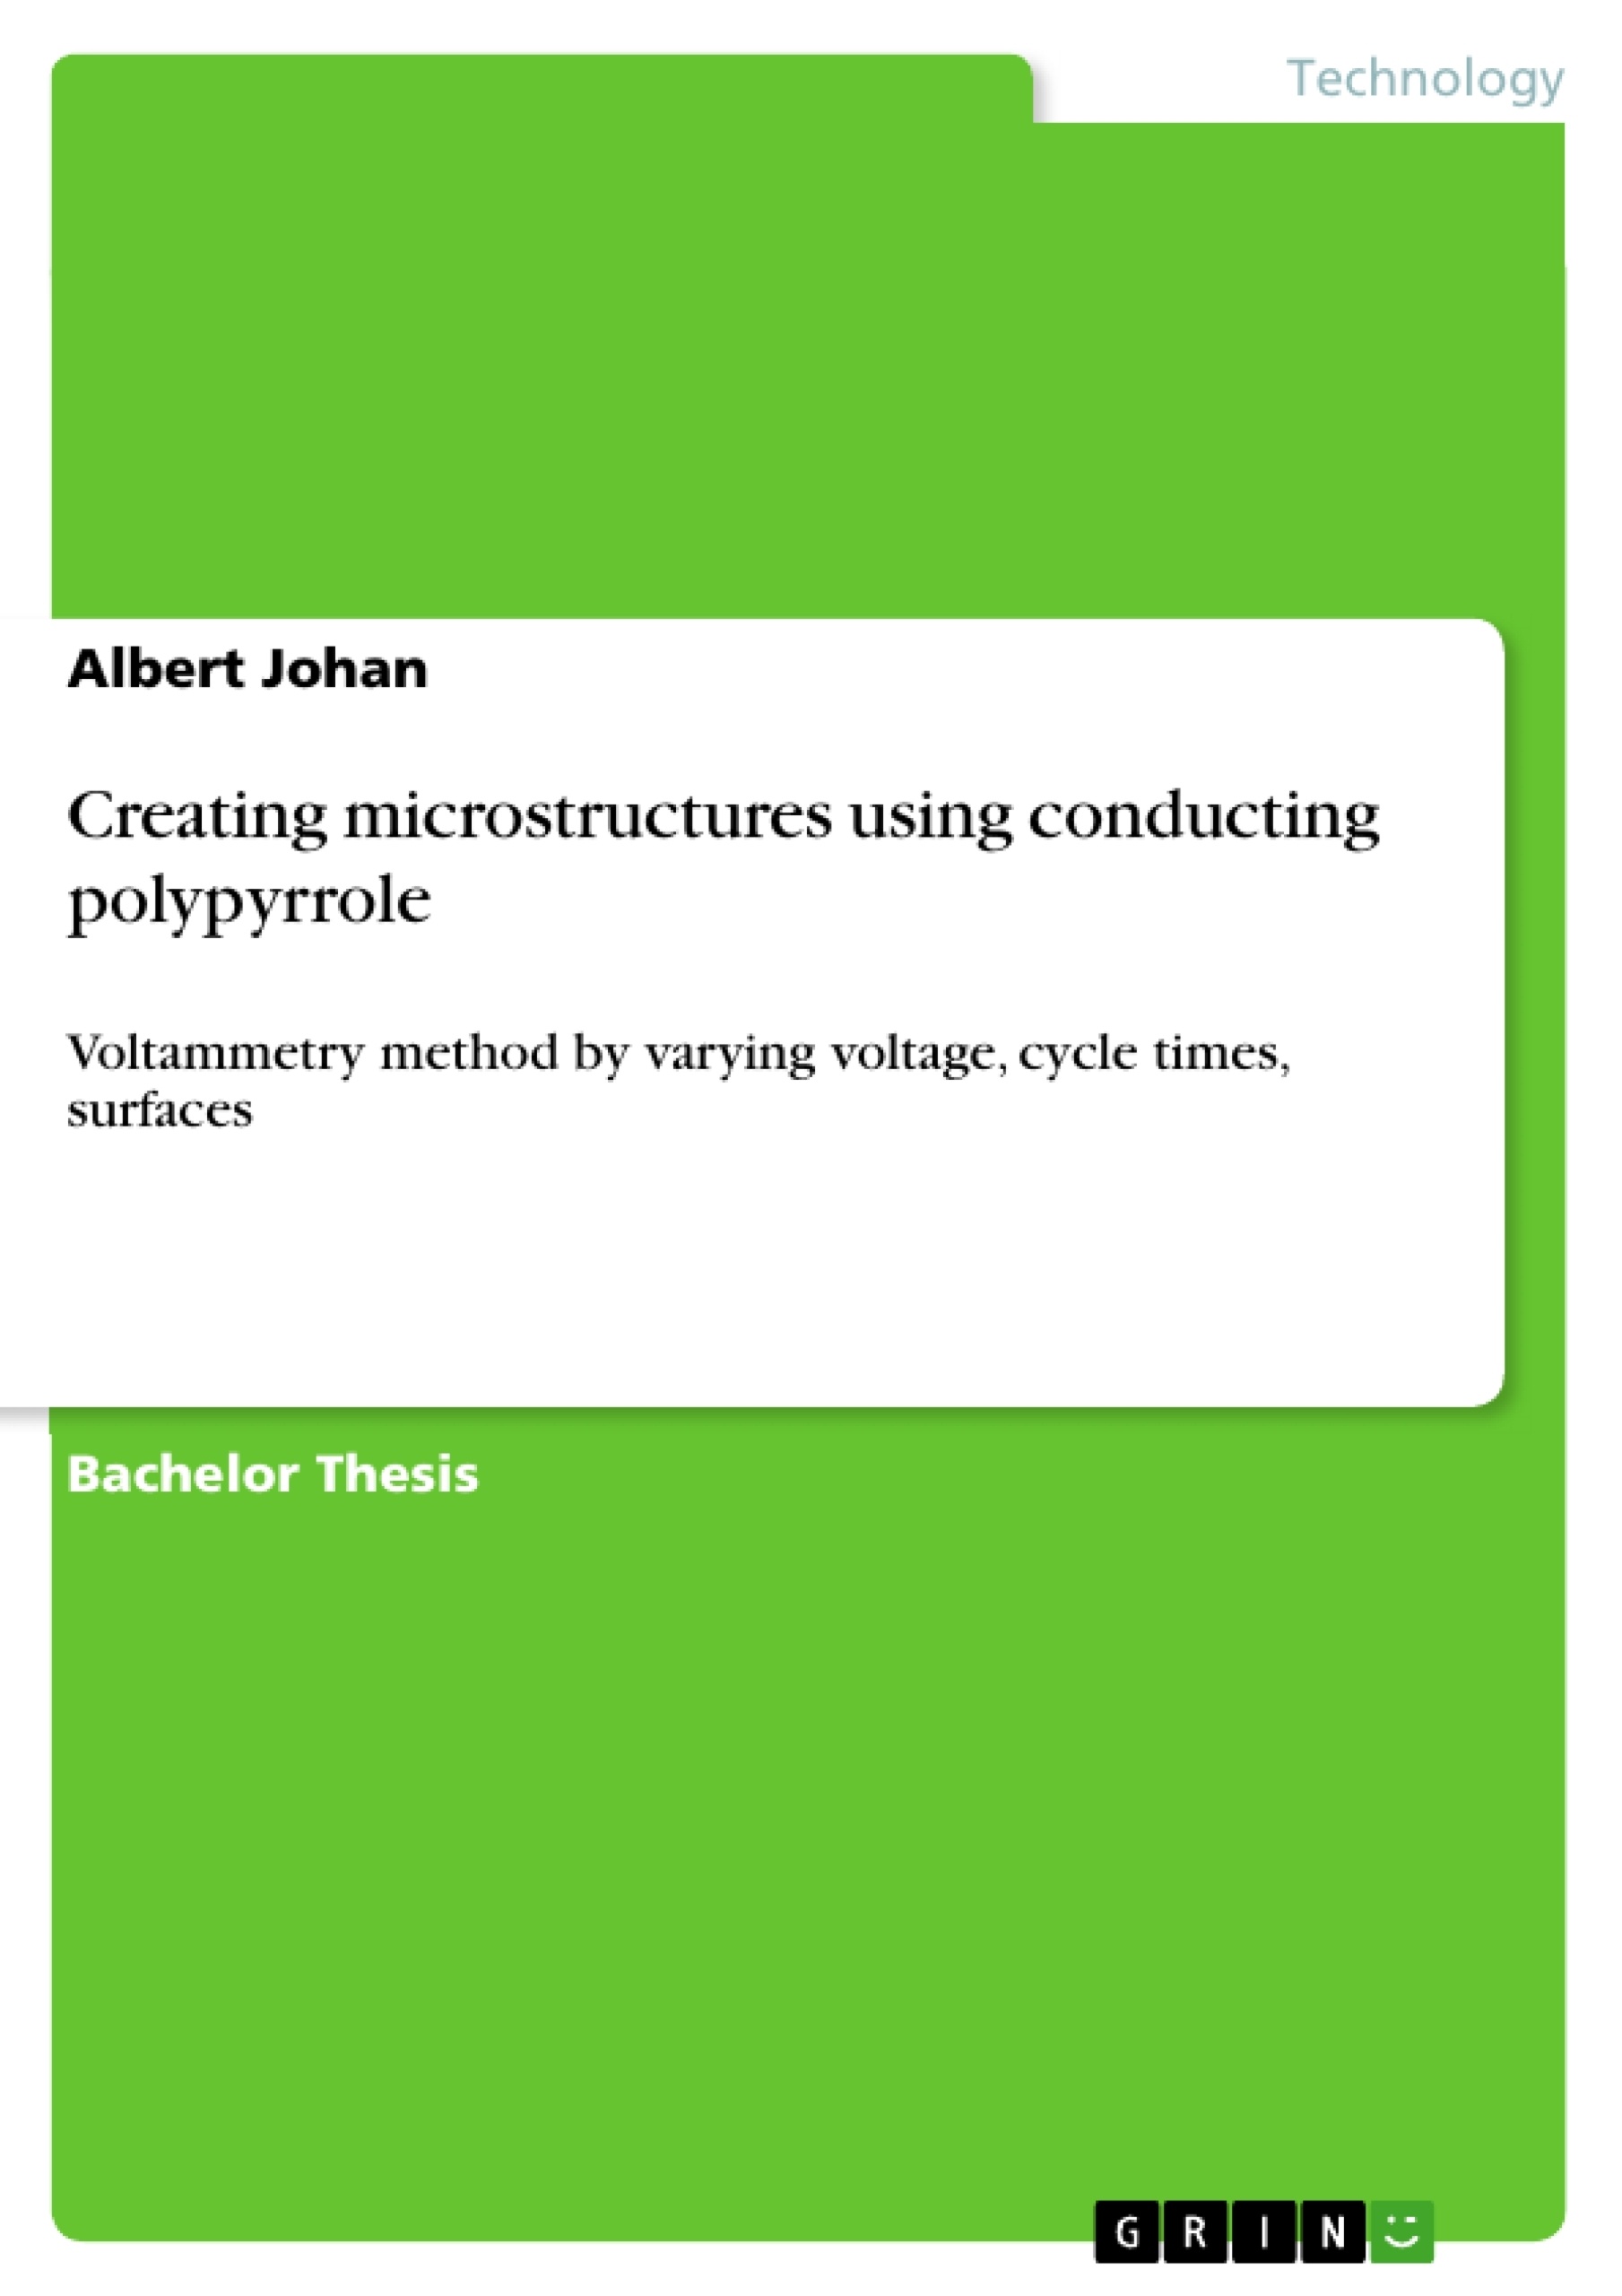 Title: Creating microstructures using conducting polypyrrole